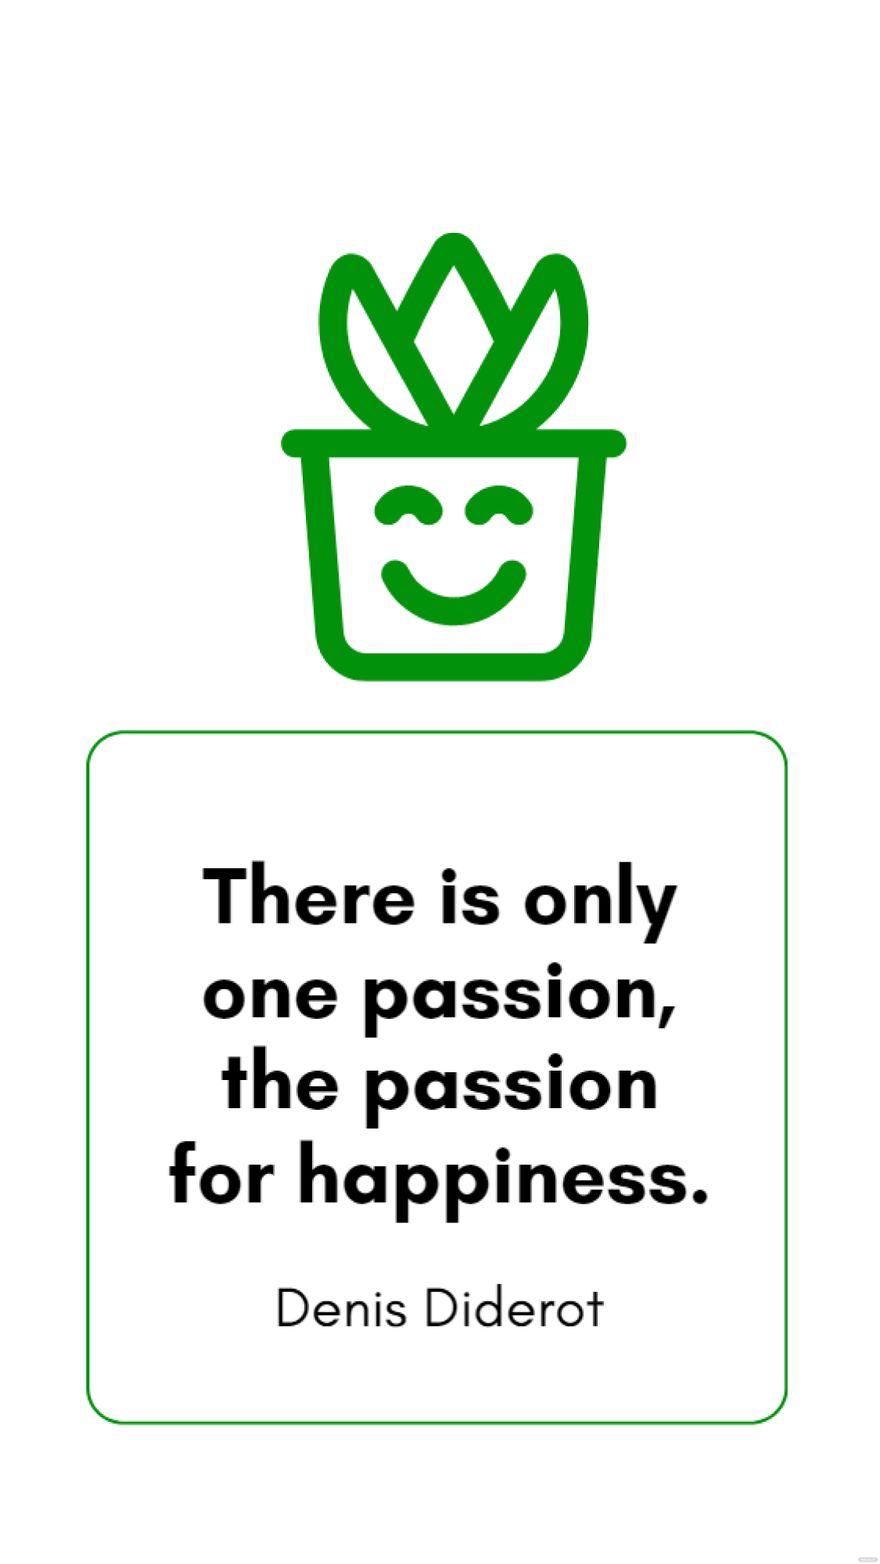 Denis Diderot - There is only one passion, the passion for happiness.